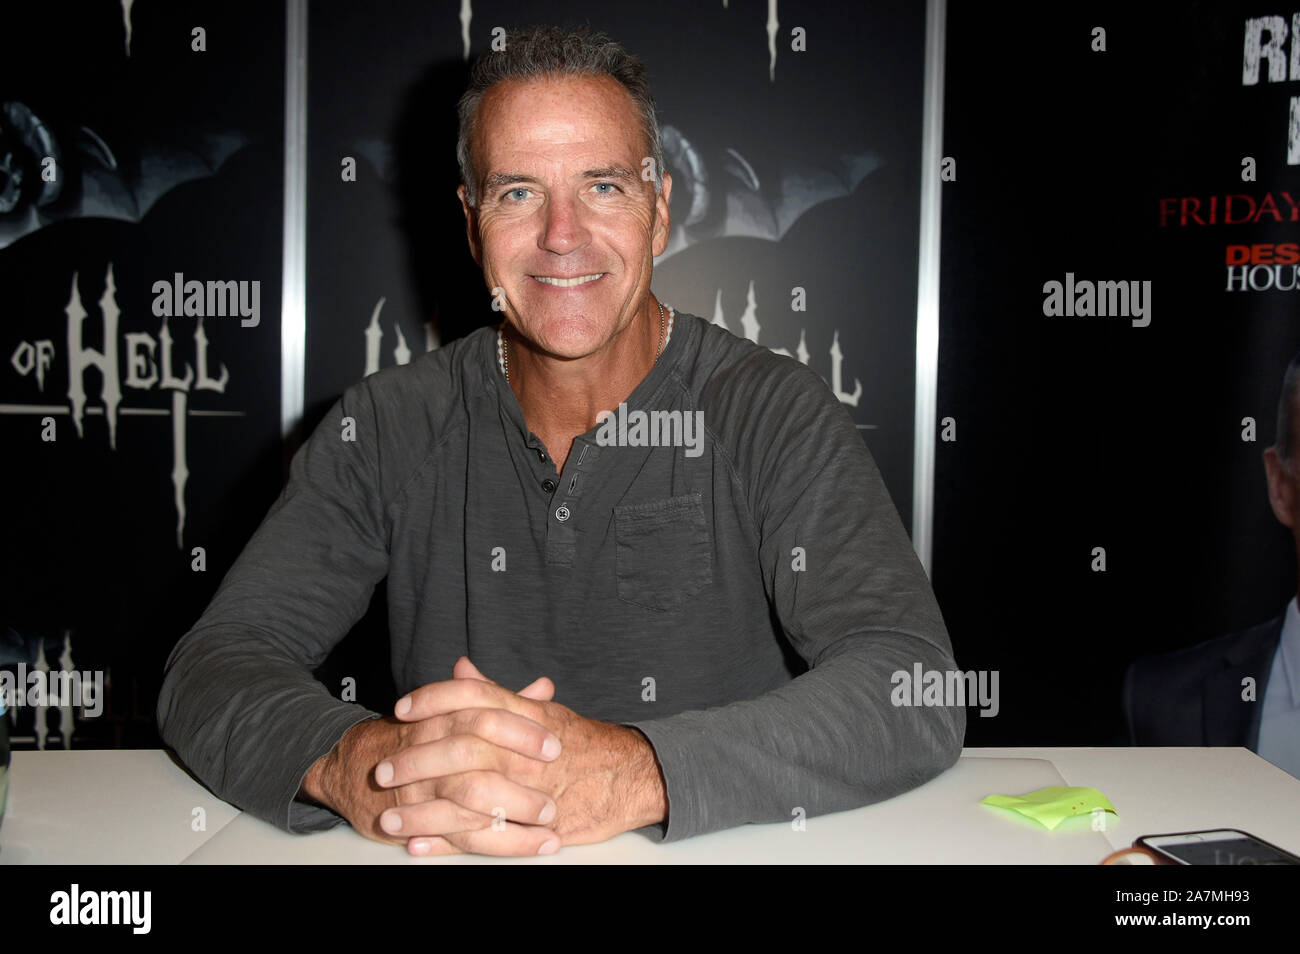 Richard Burgi at the Weekend of Hell in the Crowne Plaza. Neuss, 02.11.2019 | usage worldwide Stock Photo